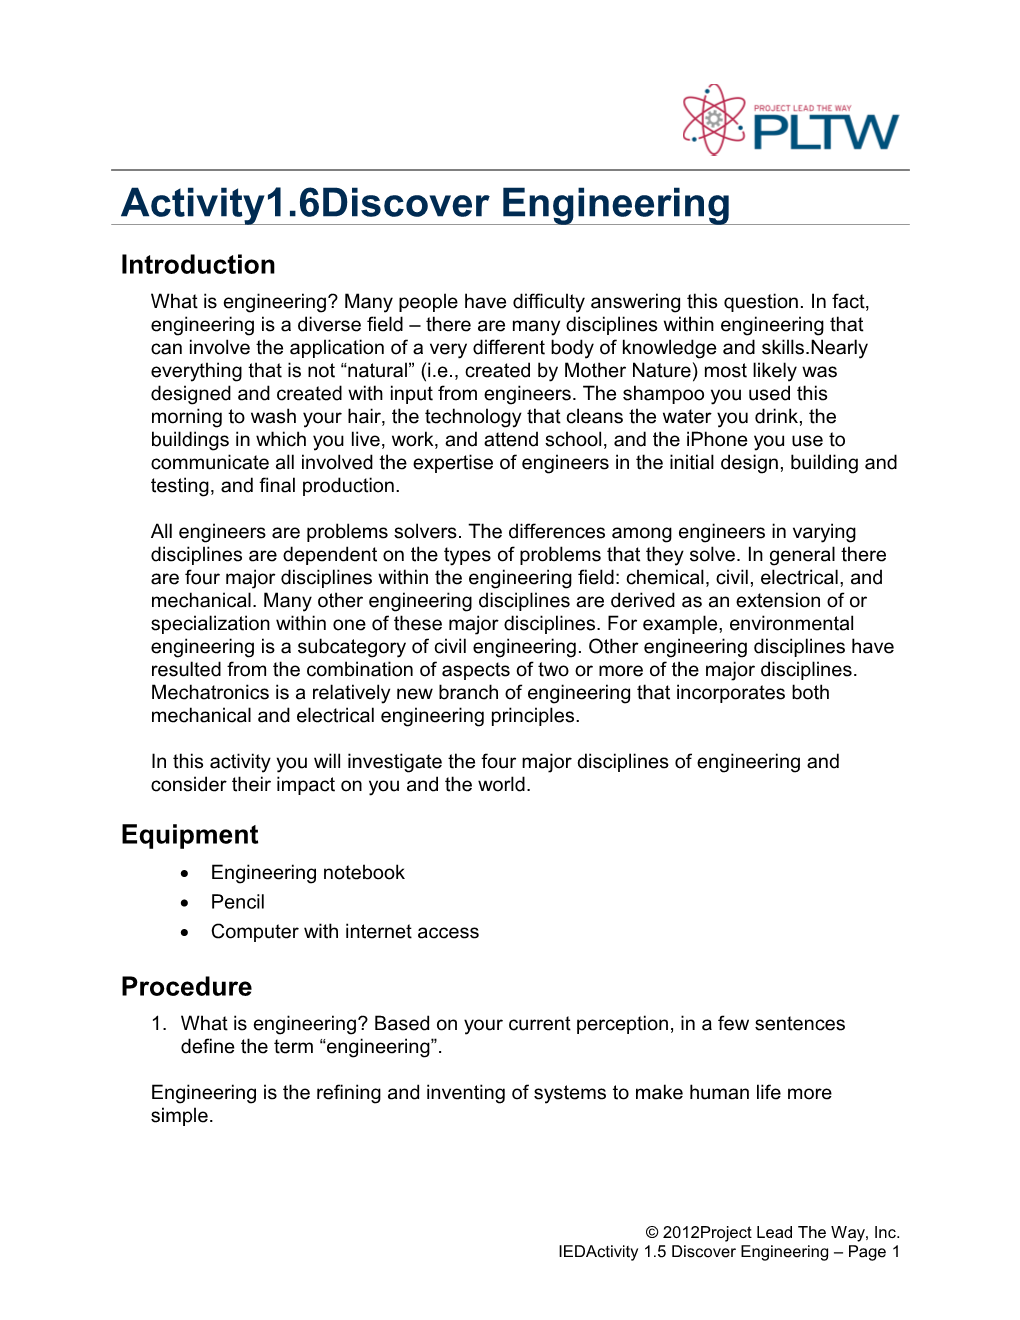 Activity 1.5 Discover Engineering